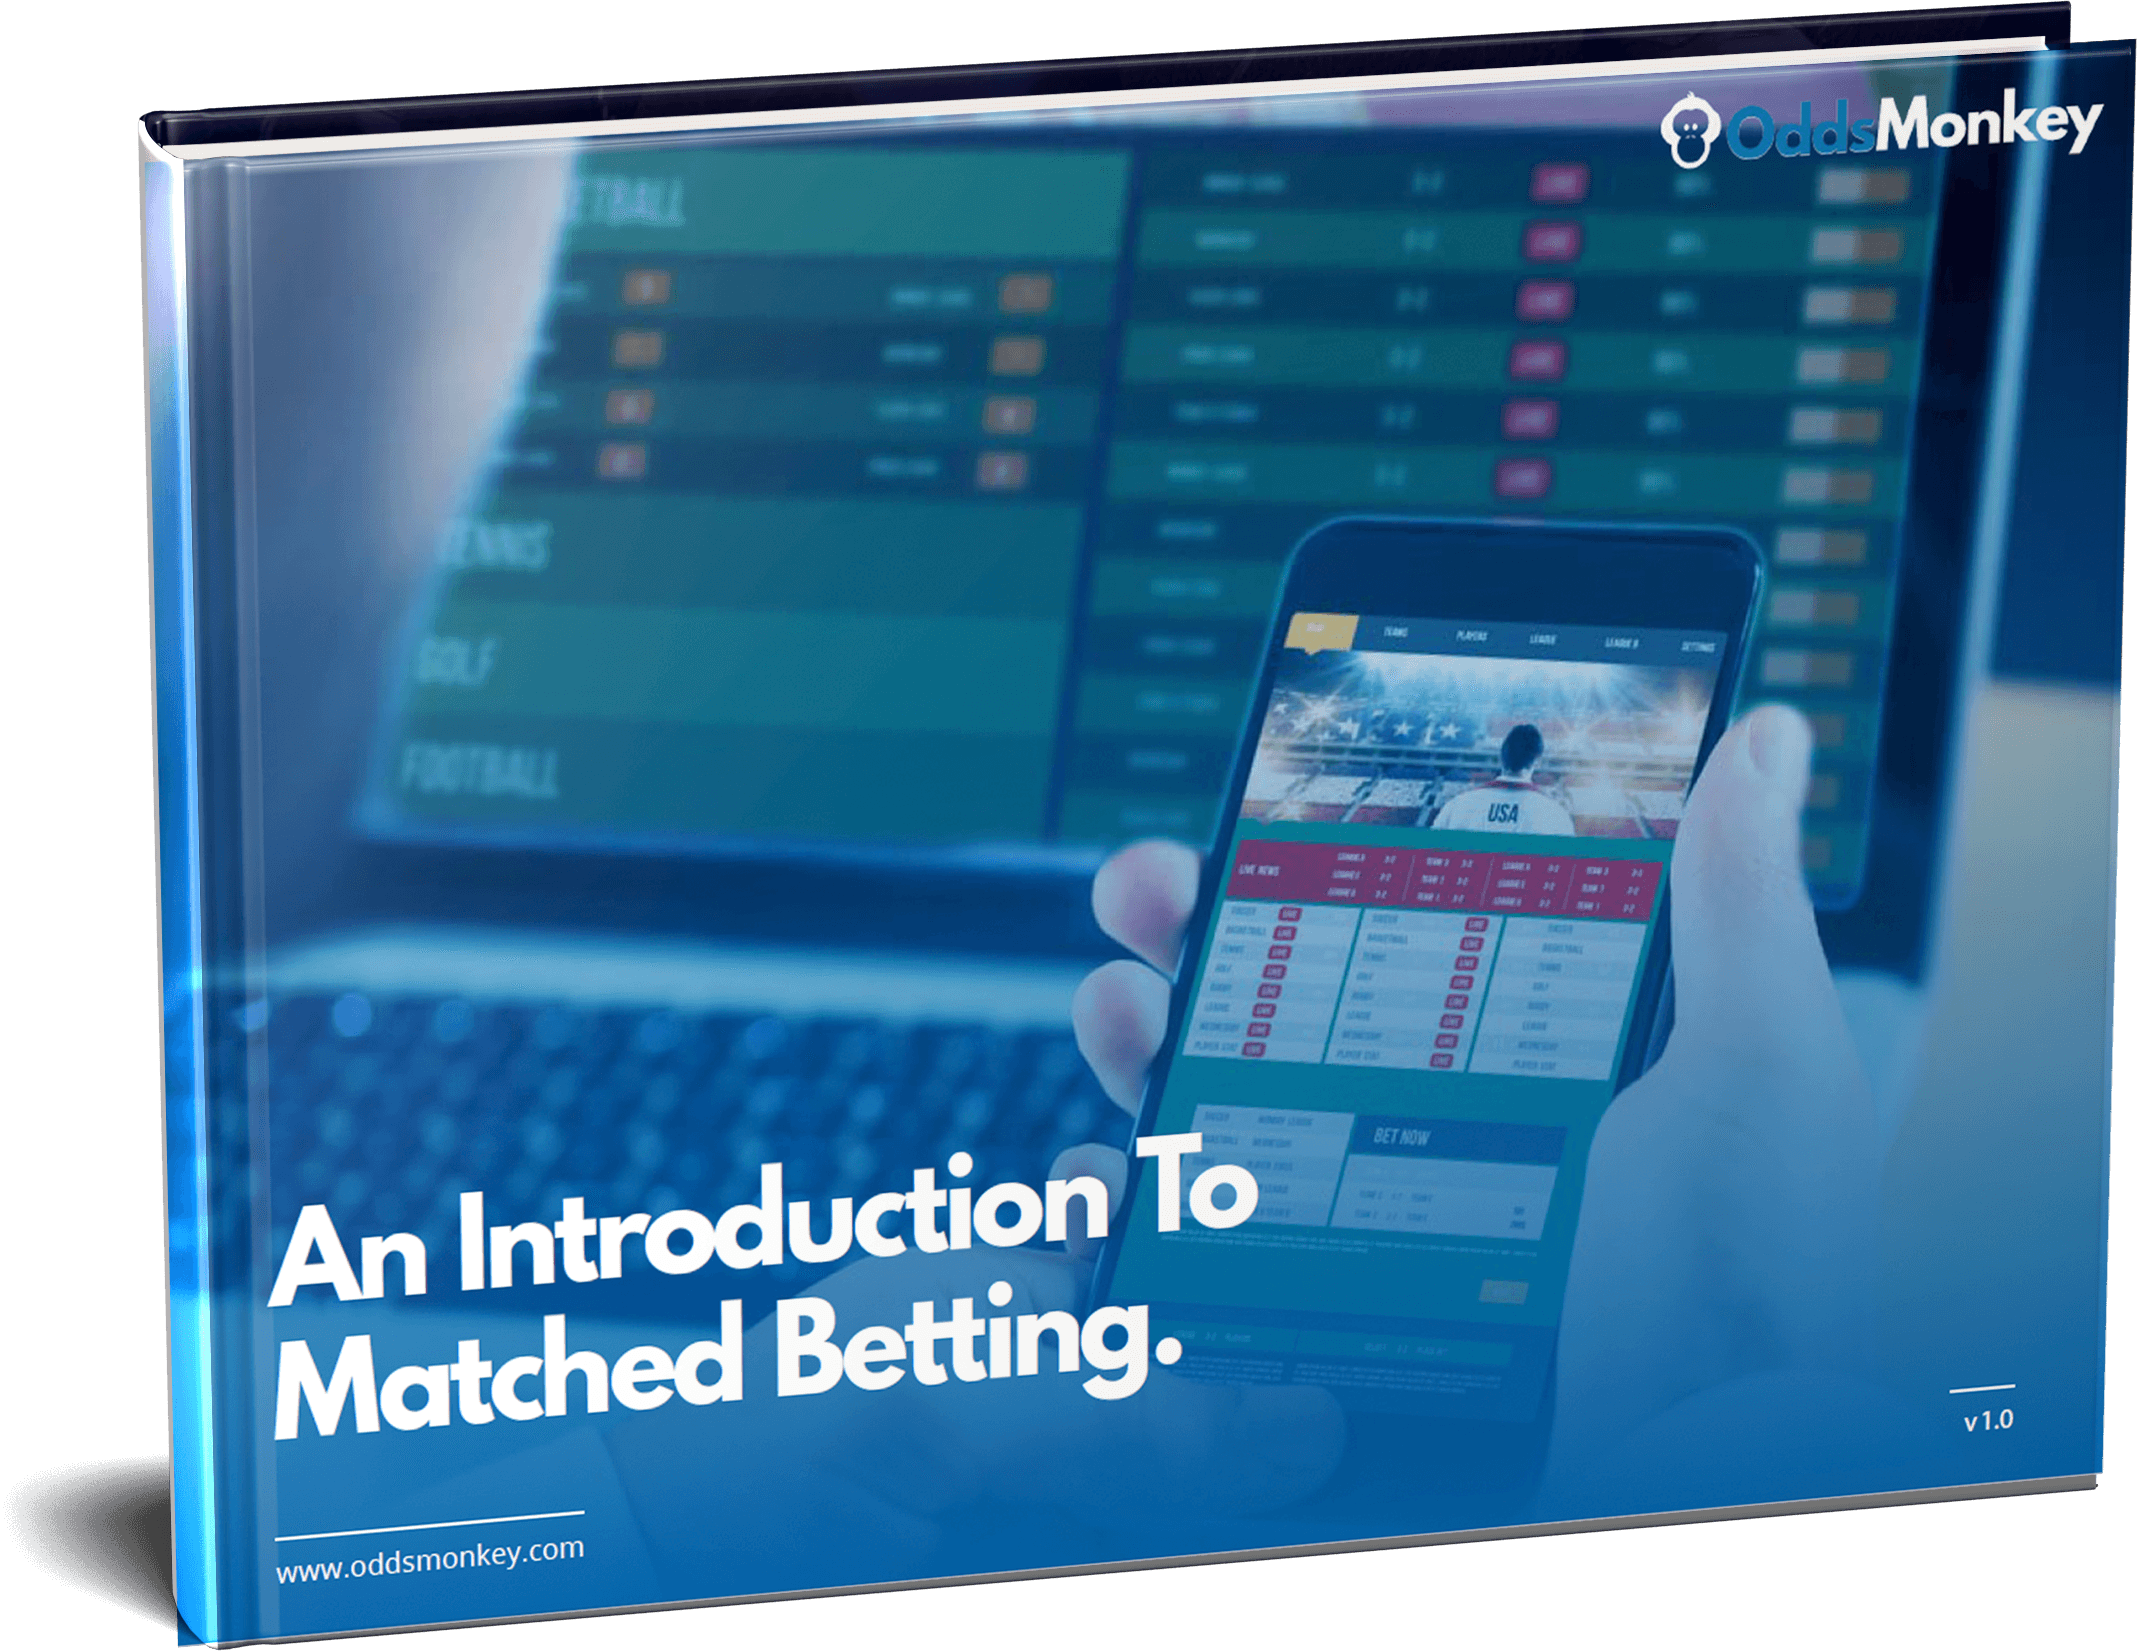 Matched betting guide pdf in running betting shops essex